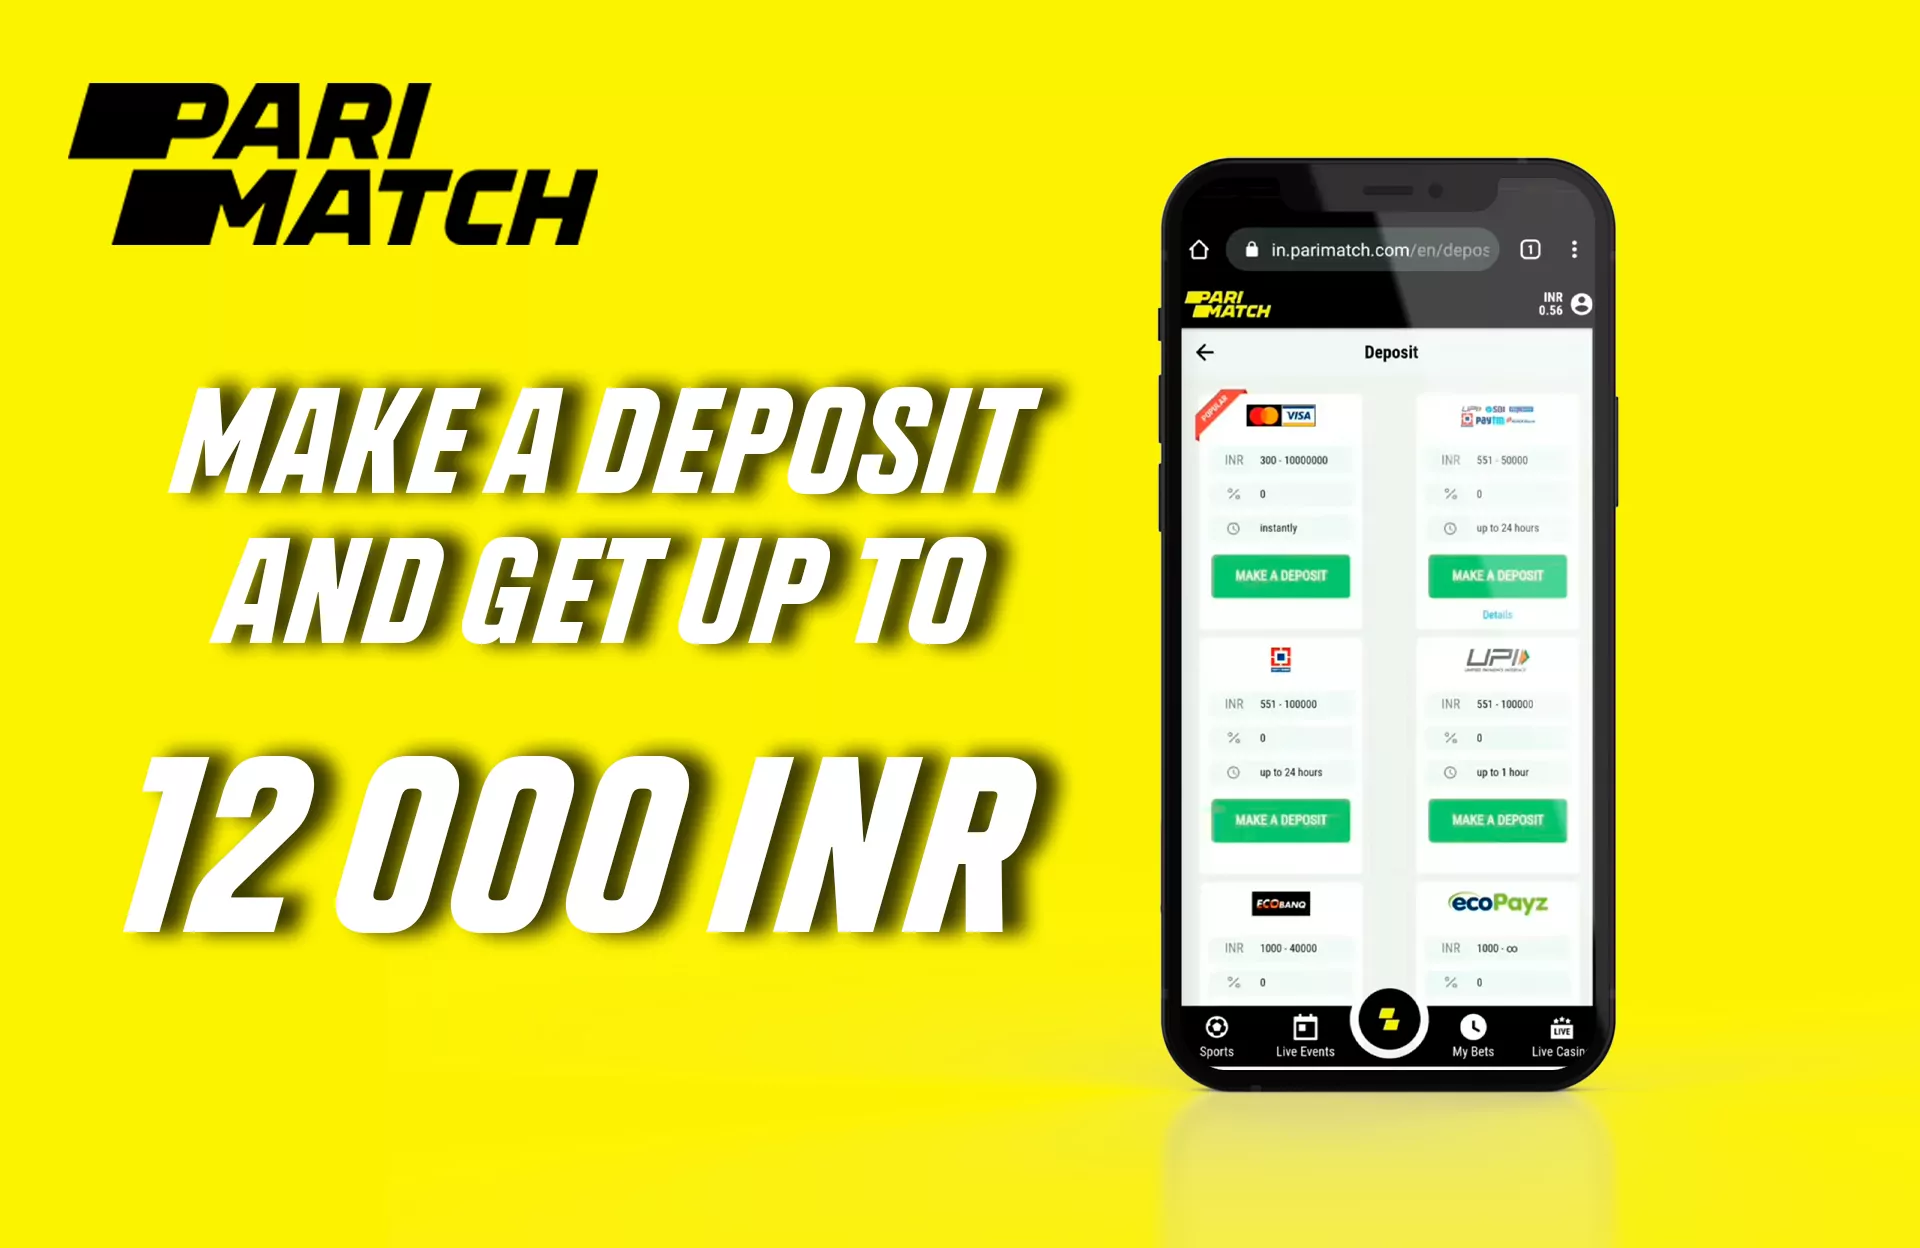 How to get a bonus in the Parimatch mobile app?